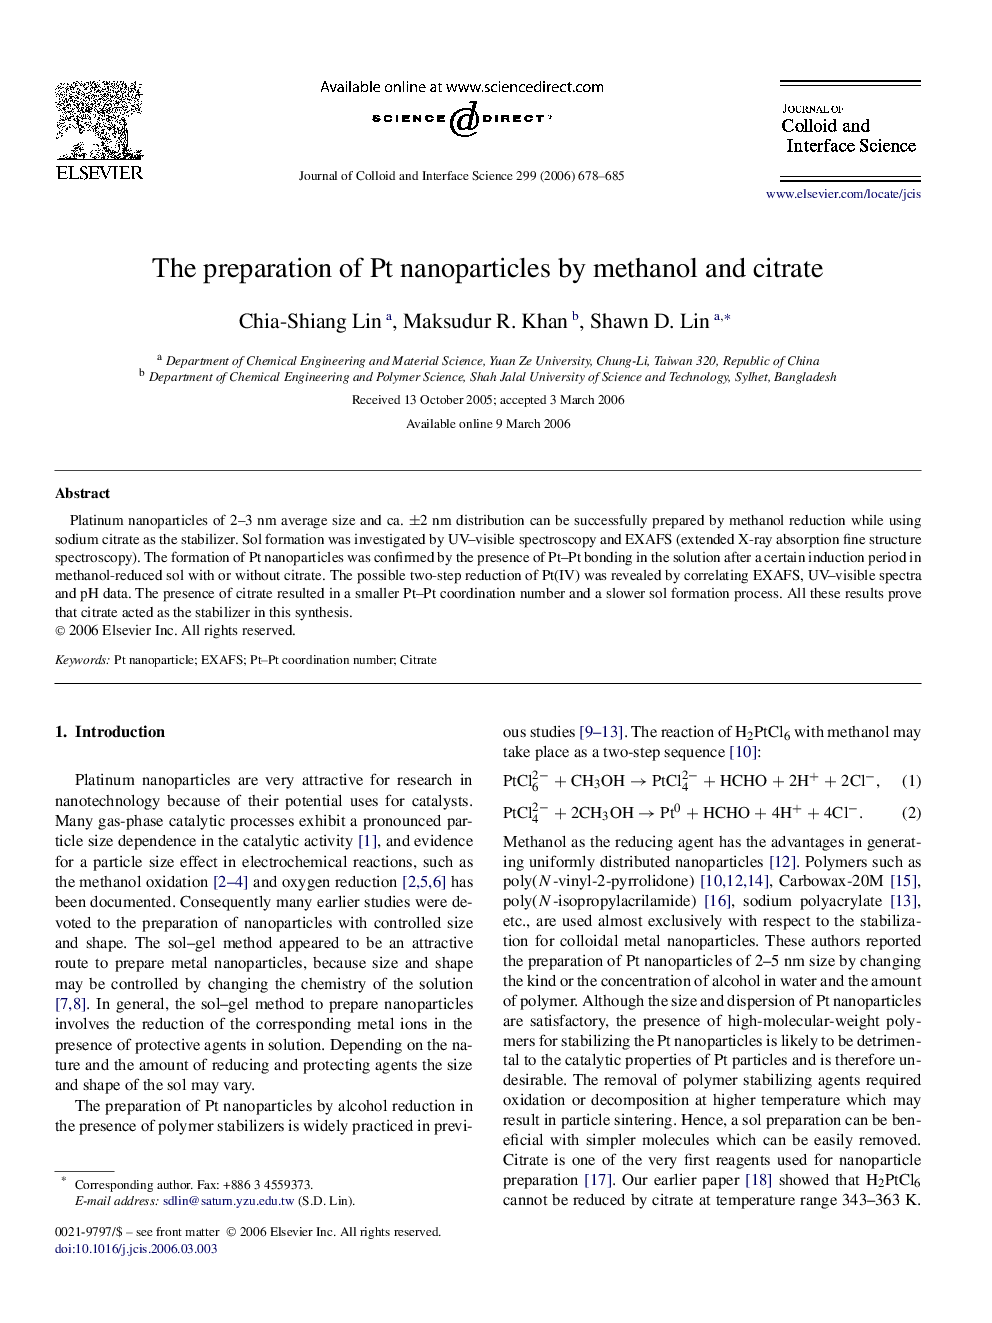 The preparation of Pt nanoparticles by methanol and citrate